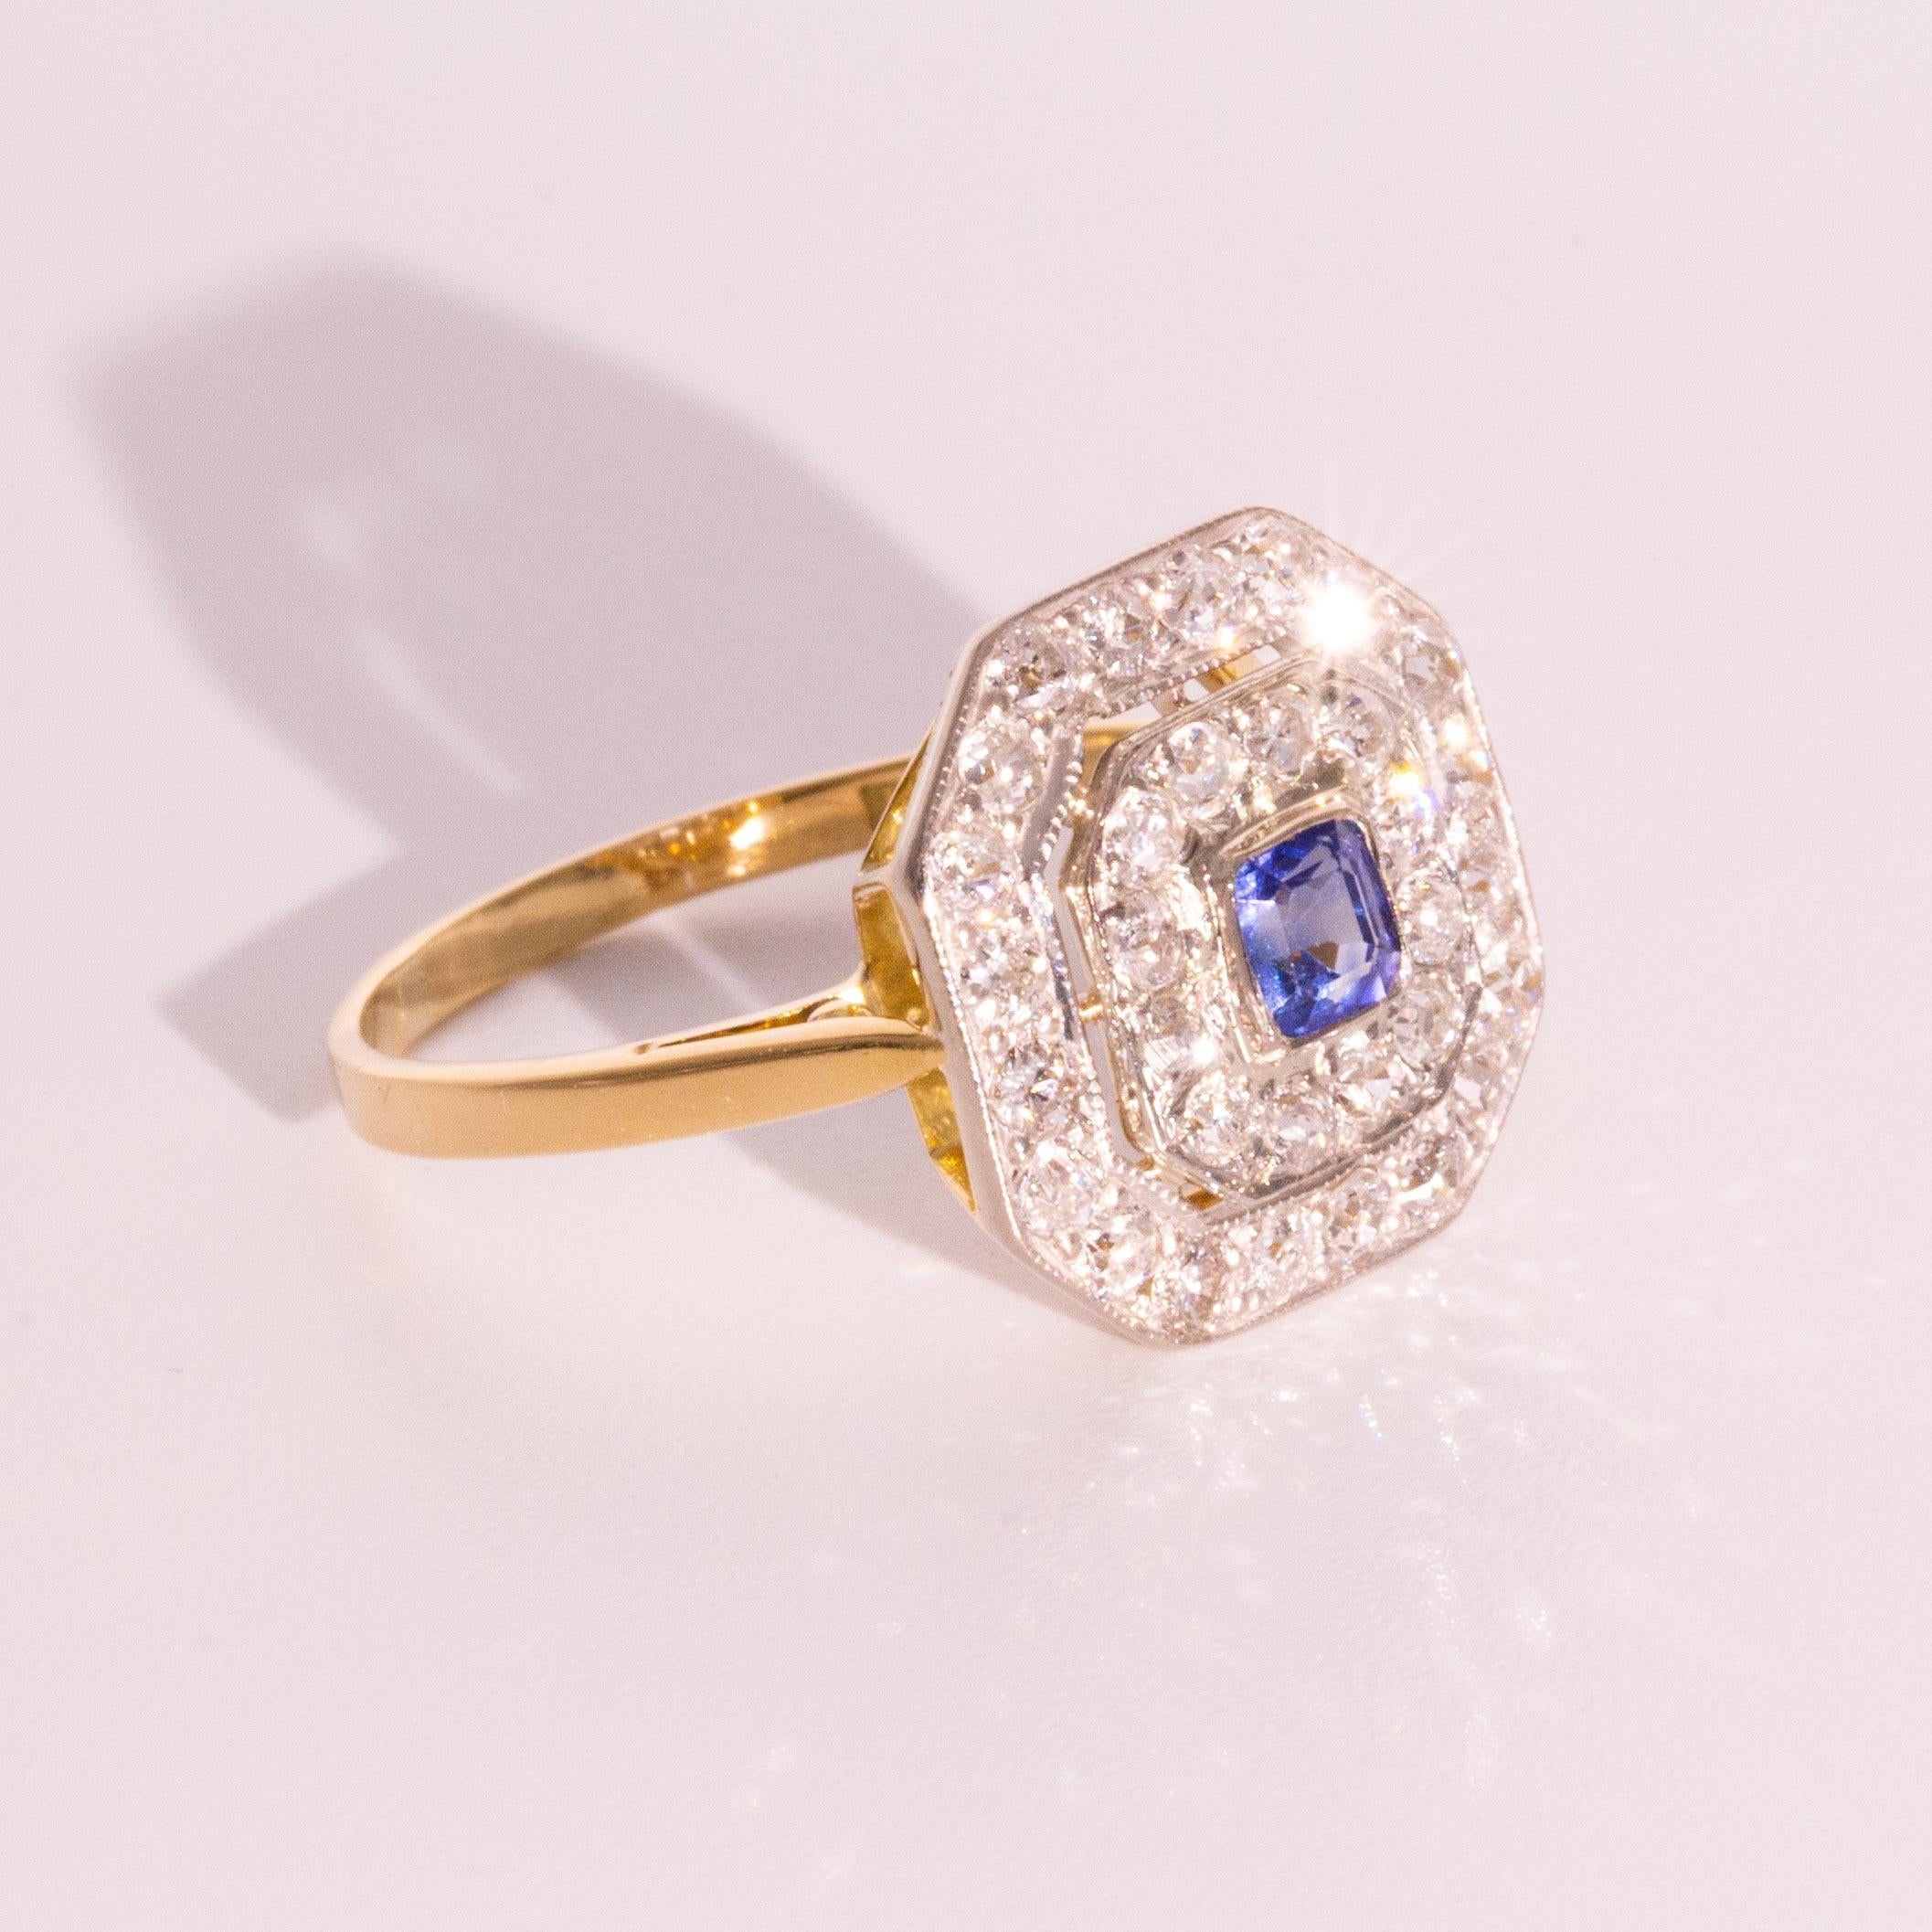 Fall in love with this adorable Sapphire Old Cut Diamond 18 Carat White Yellow Gold Ring. The old cut diamonds work amazingly well with this blue Ceylon type square cushion cut sapphire to form an octagonal shape 18 carat white gold mount. The